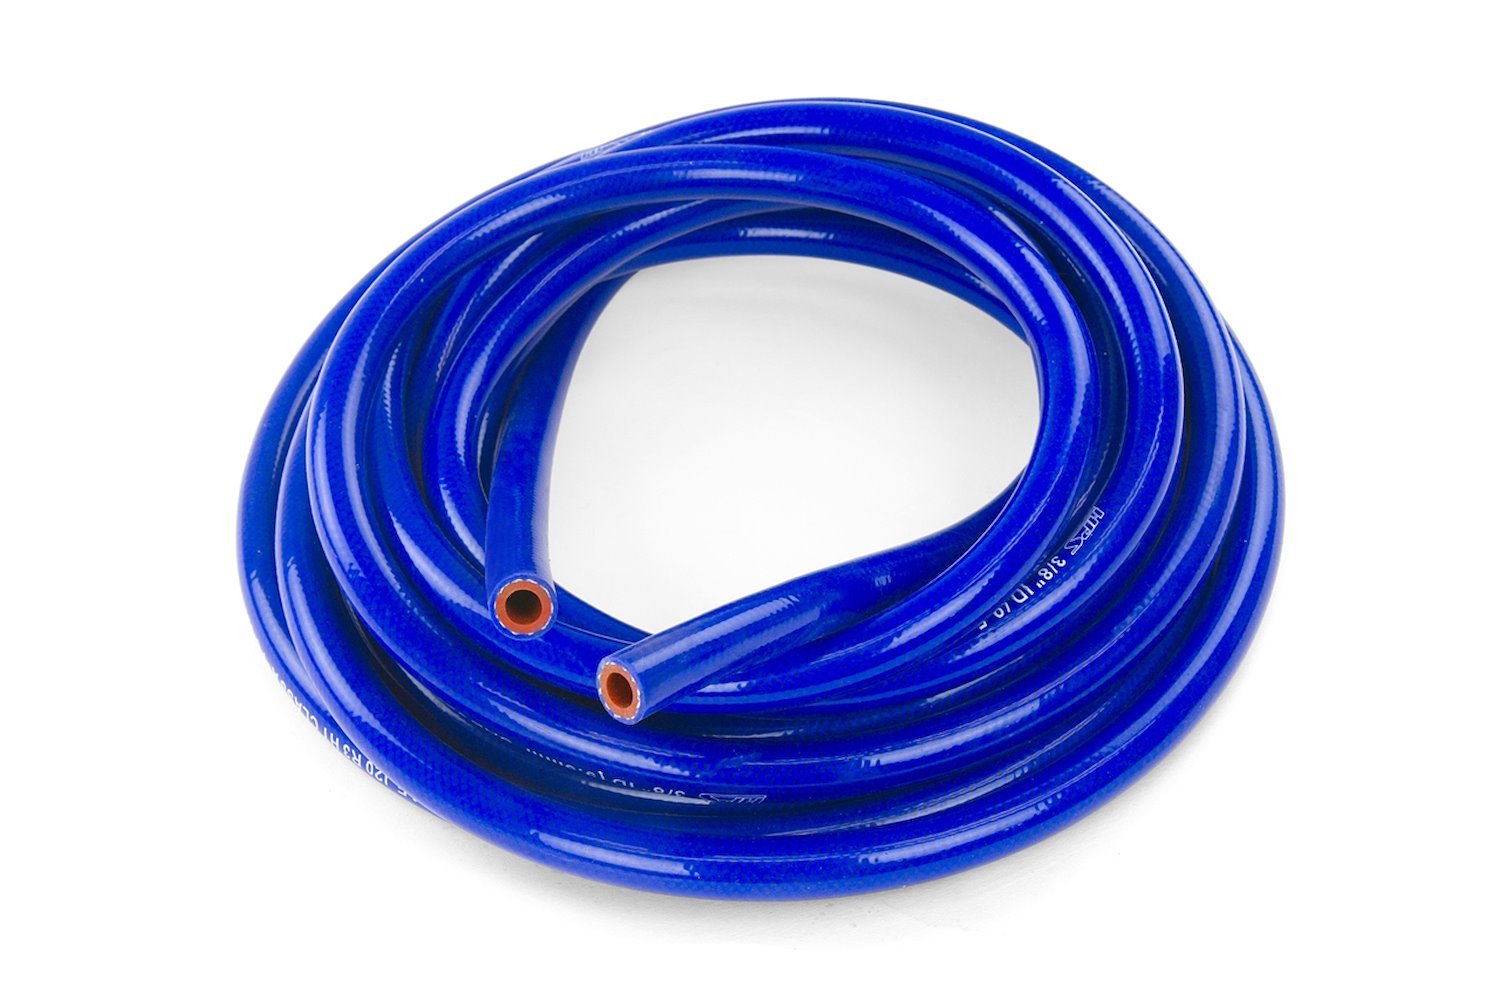 HTHH-050-BLUEx25 Silicone Heater Hose Tubing, High-Temp 1-Ply Reinforced, 1/2 in. ID, 25 ft. Roll, Blue